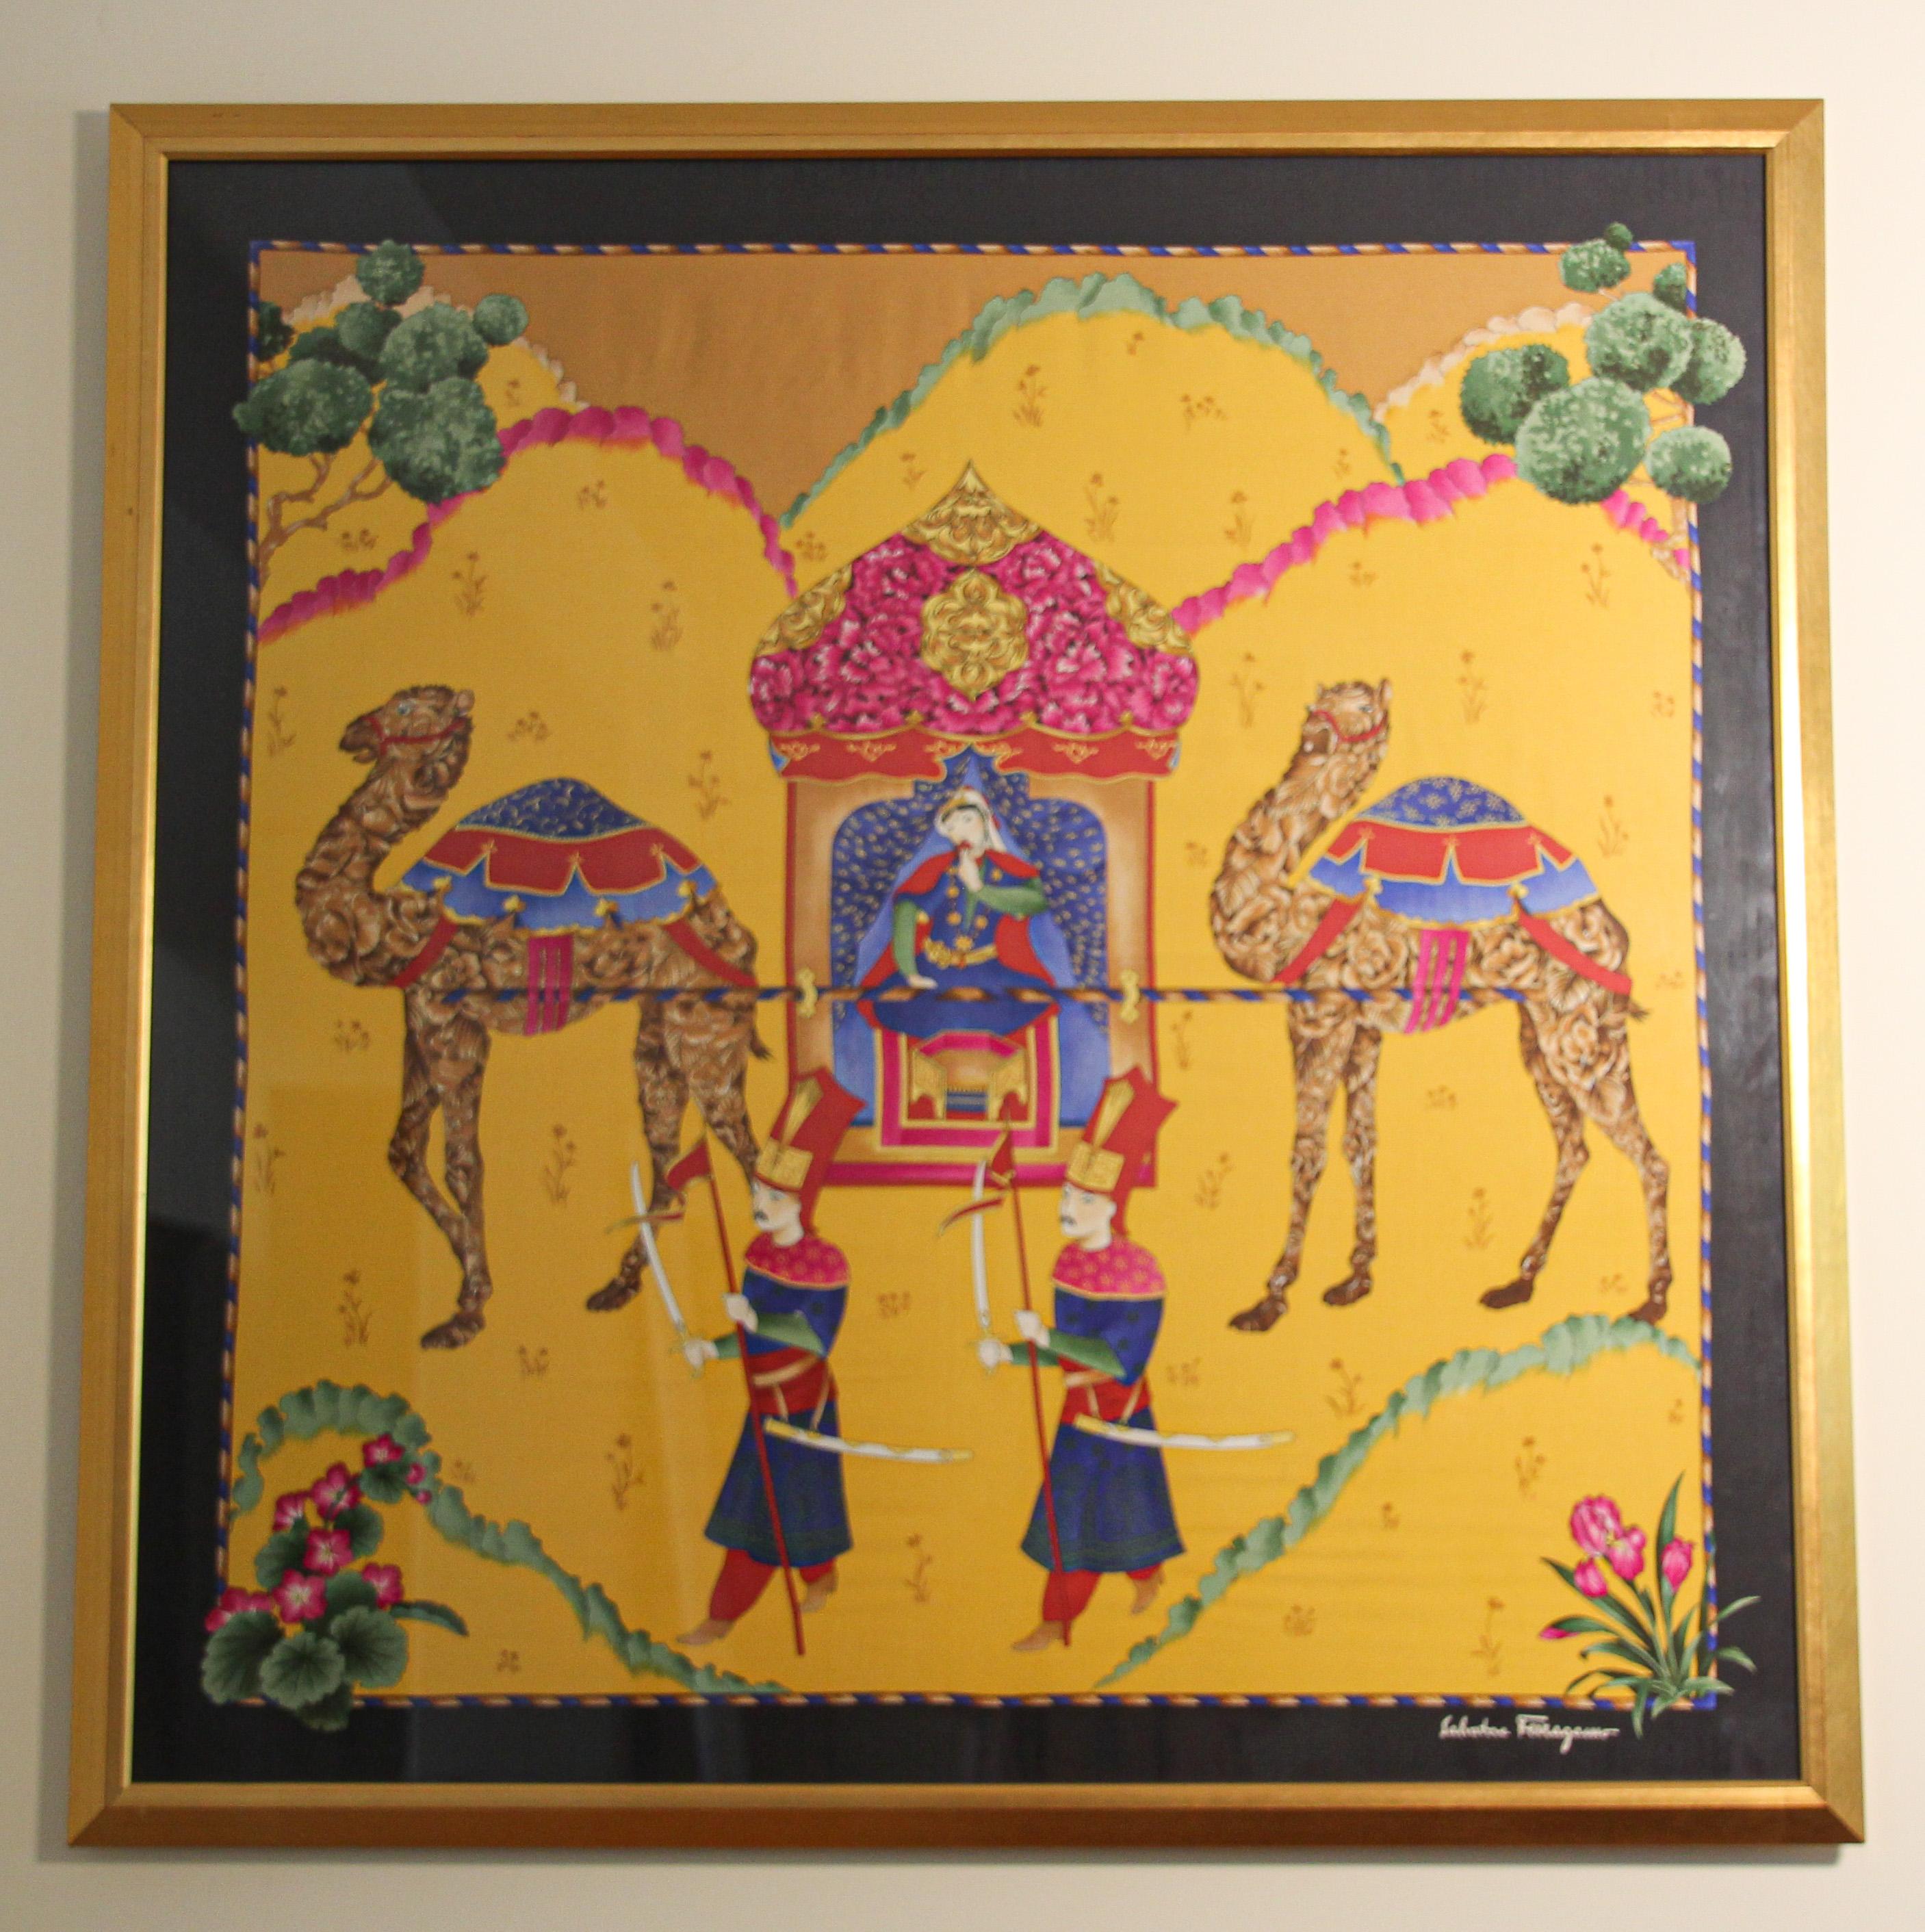 Rare Salvatore Ferragamo framed silk scarf with a Mughal scene of a princess being carried  by camels in a palanquin decorated with flowers and two guards protecting her.
Great decorative eye-catching scarf that has been elegantly framed.
Wonderful